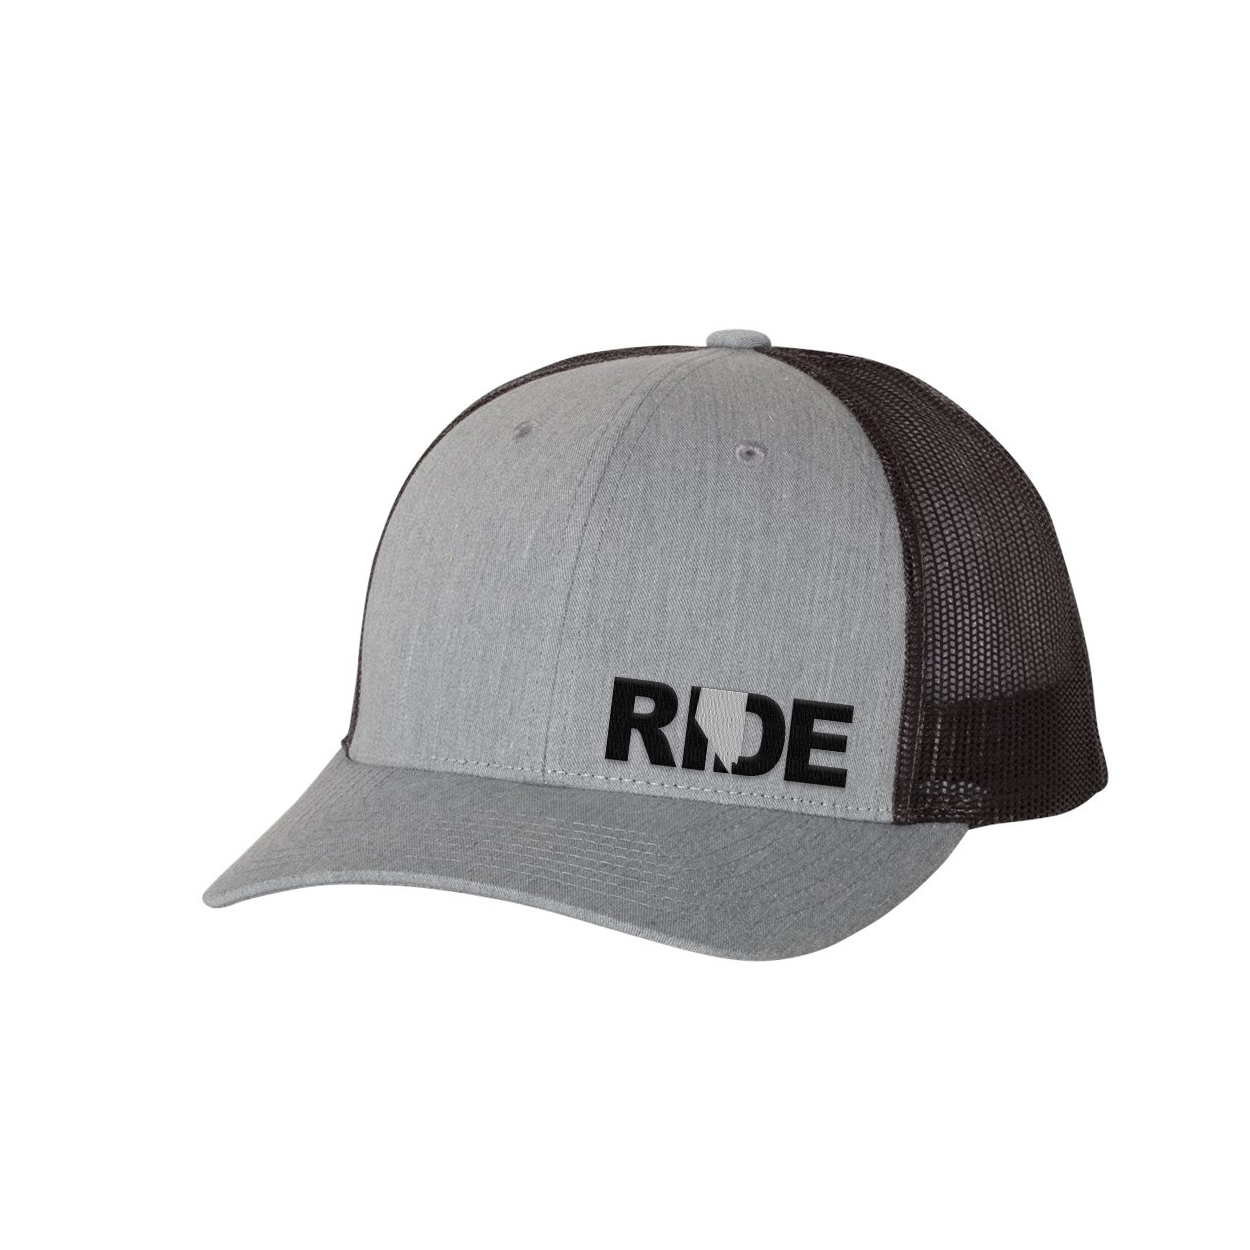 Ride Nevada Night Out Pro Embroidered Snapback Trucker Hat Heather Gray/Black